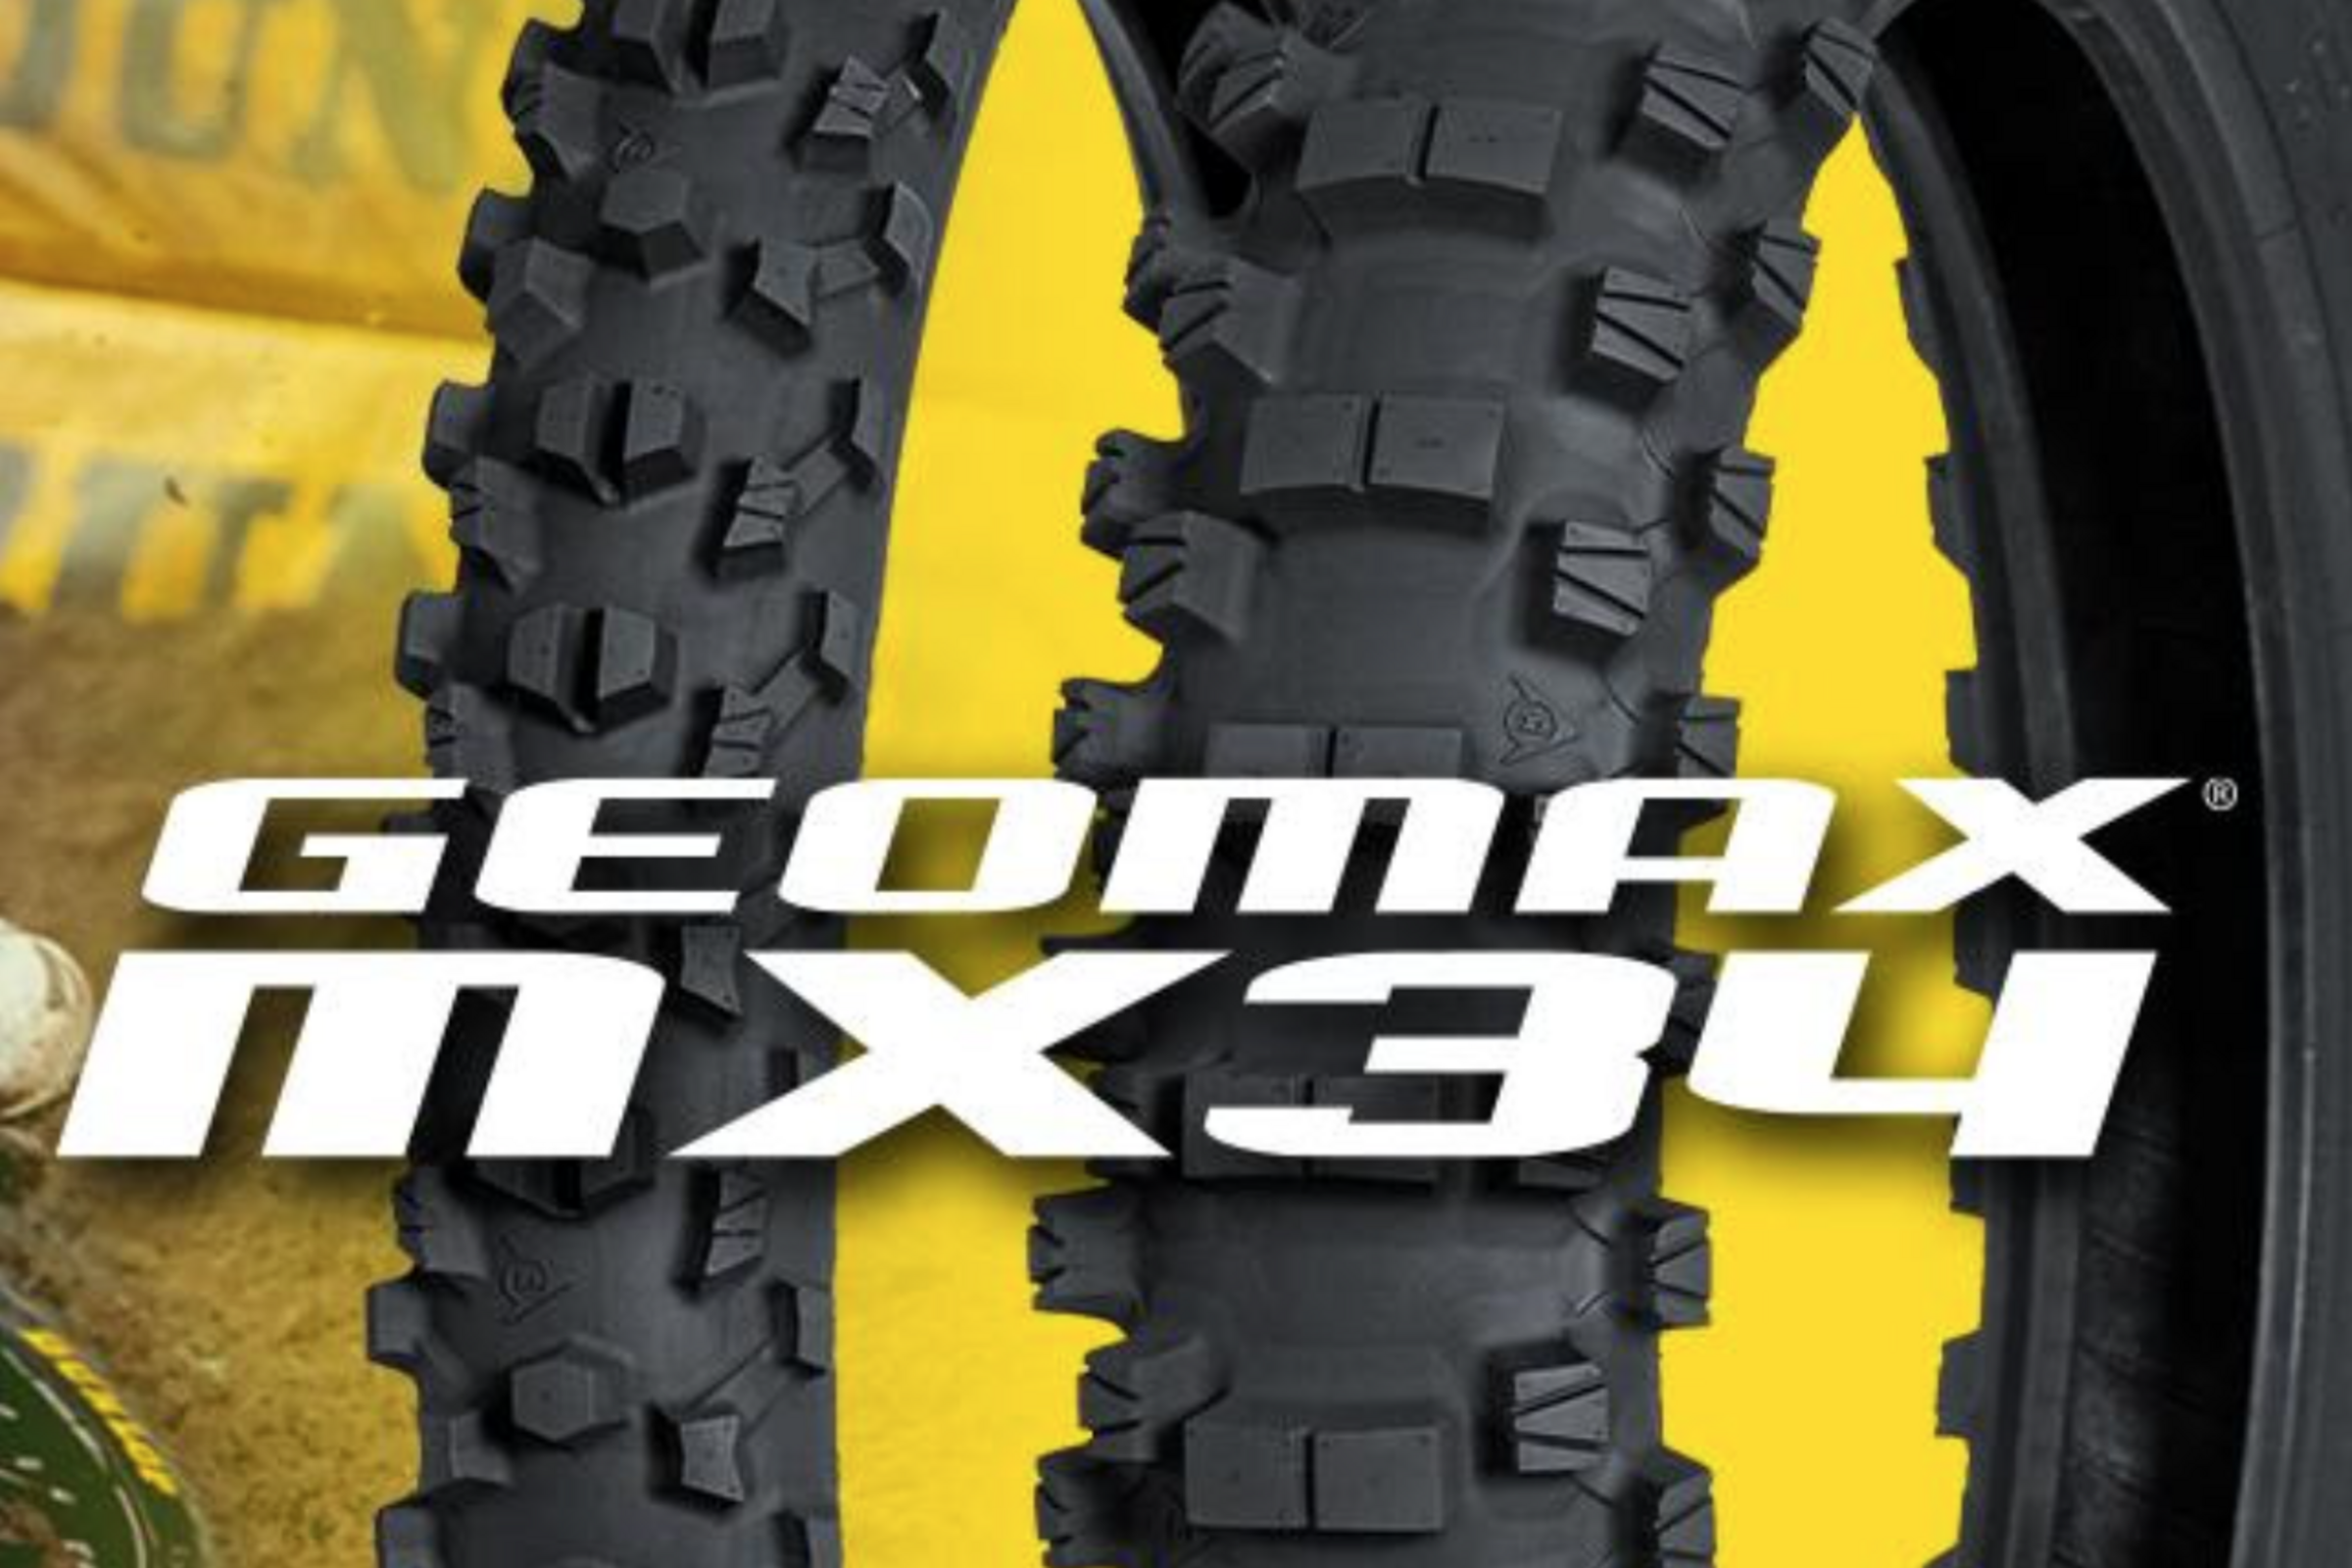 Dunlop Motorcycle Tires Introduces the Geomax MX34 - Racer X